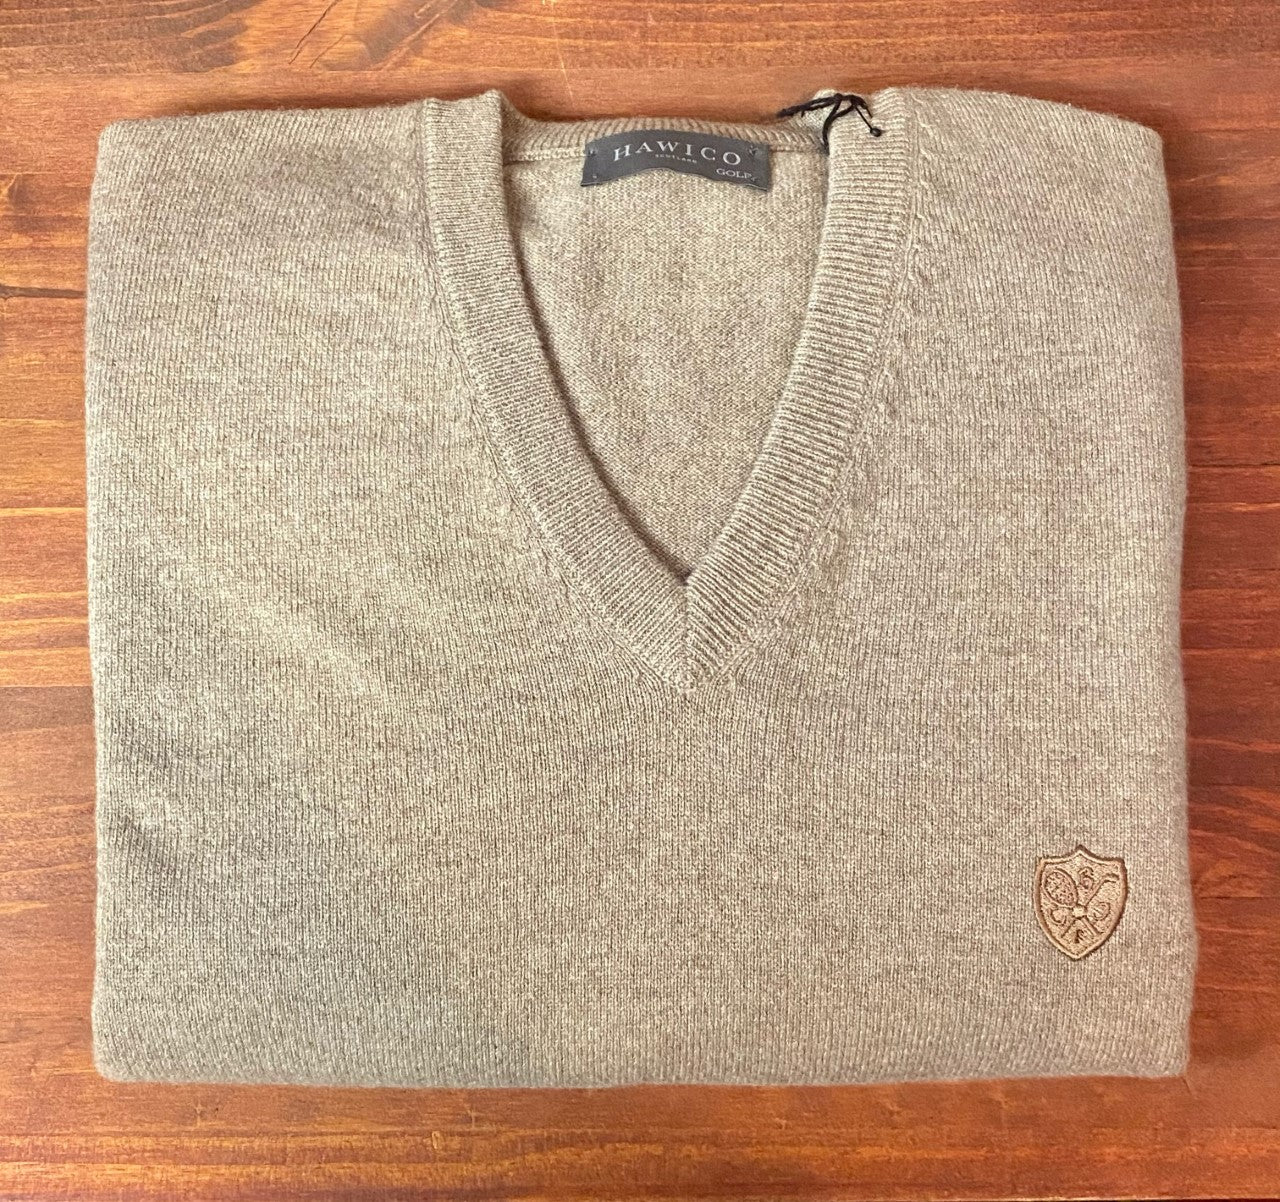 Hawico Cashmere Sweater – Biltmore Forest Country Club